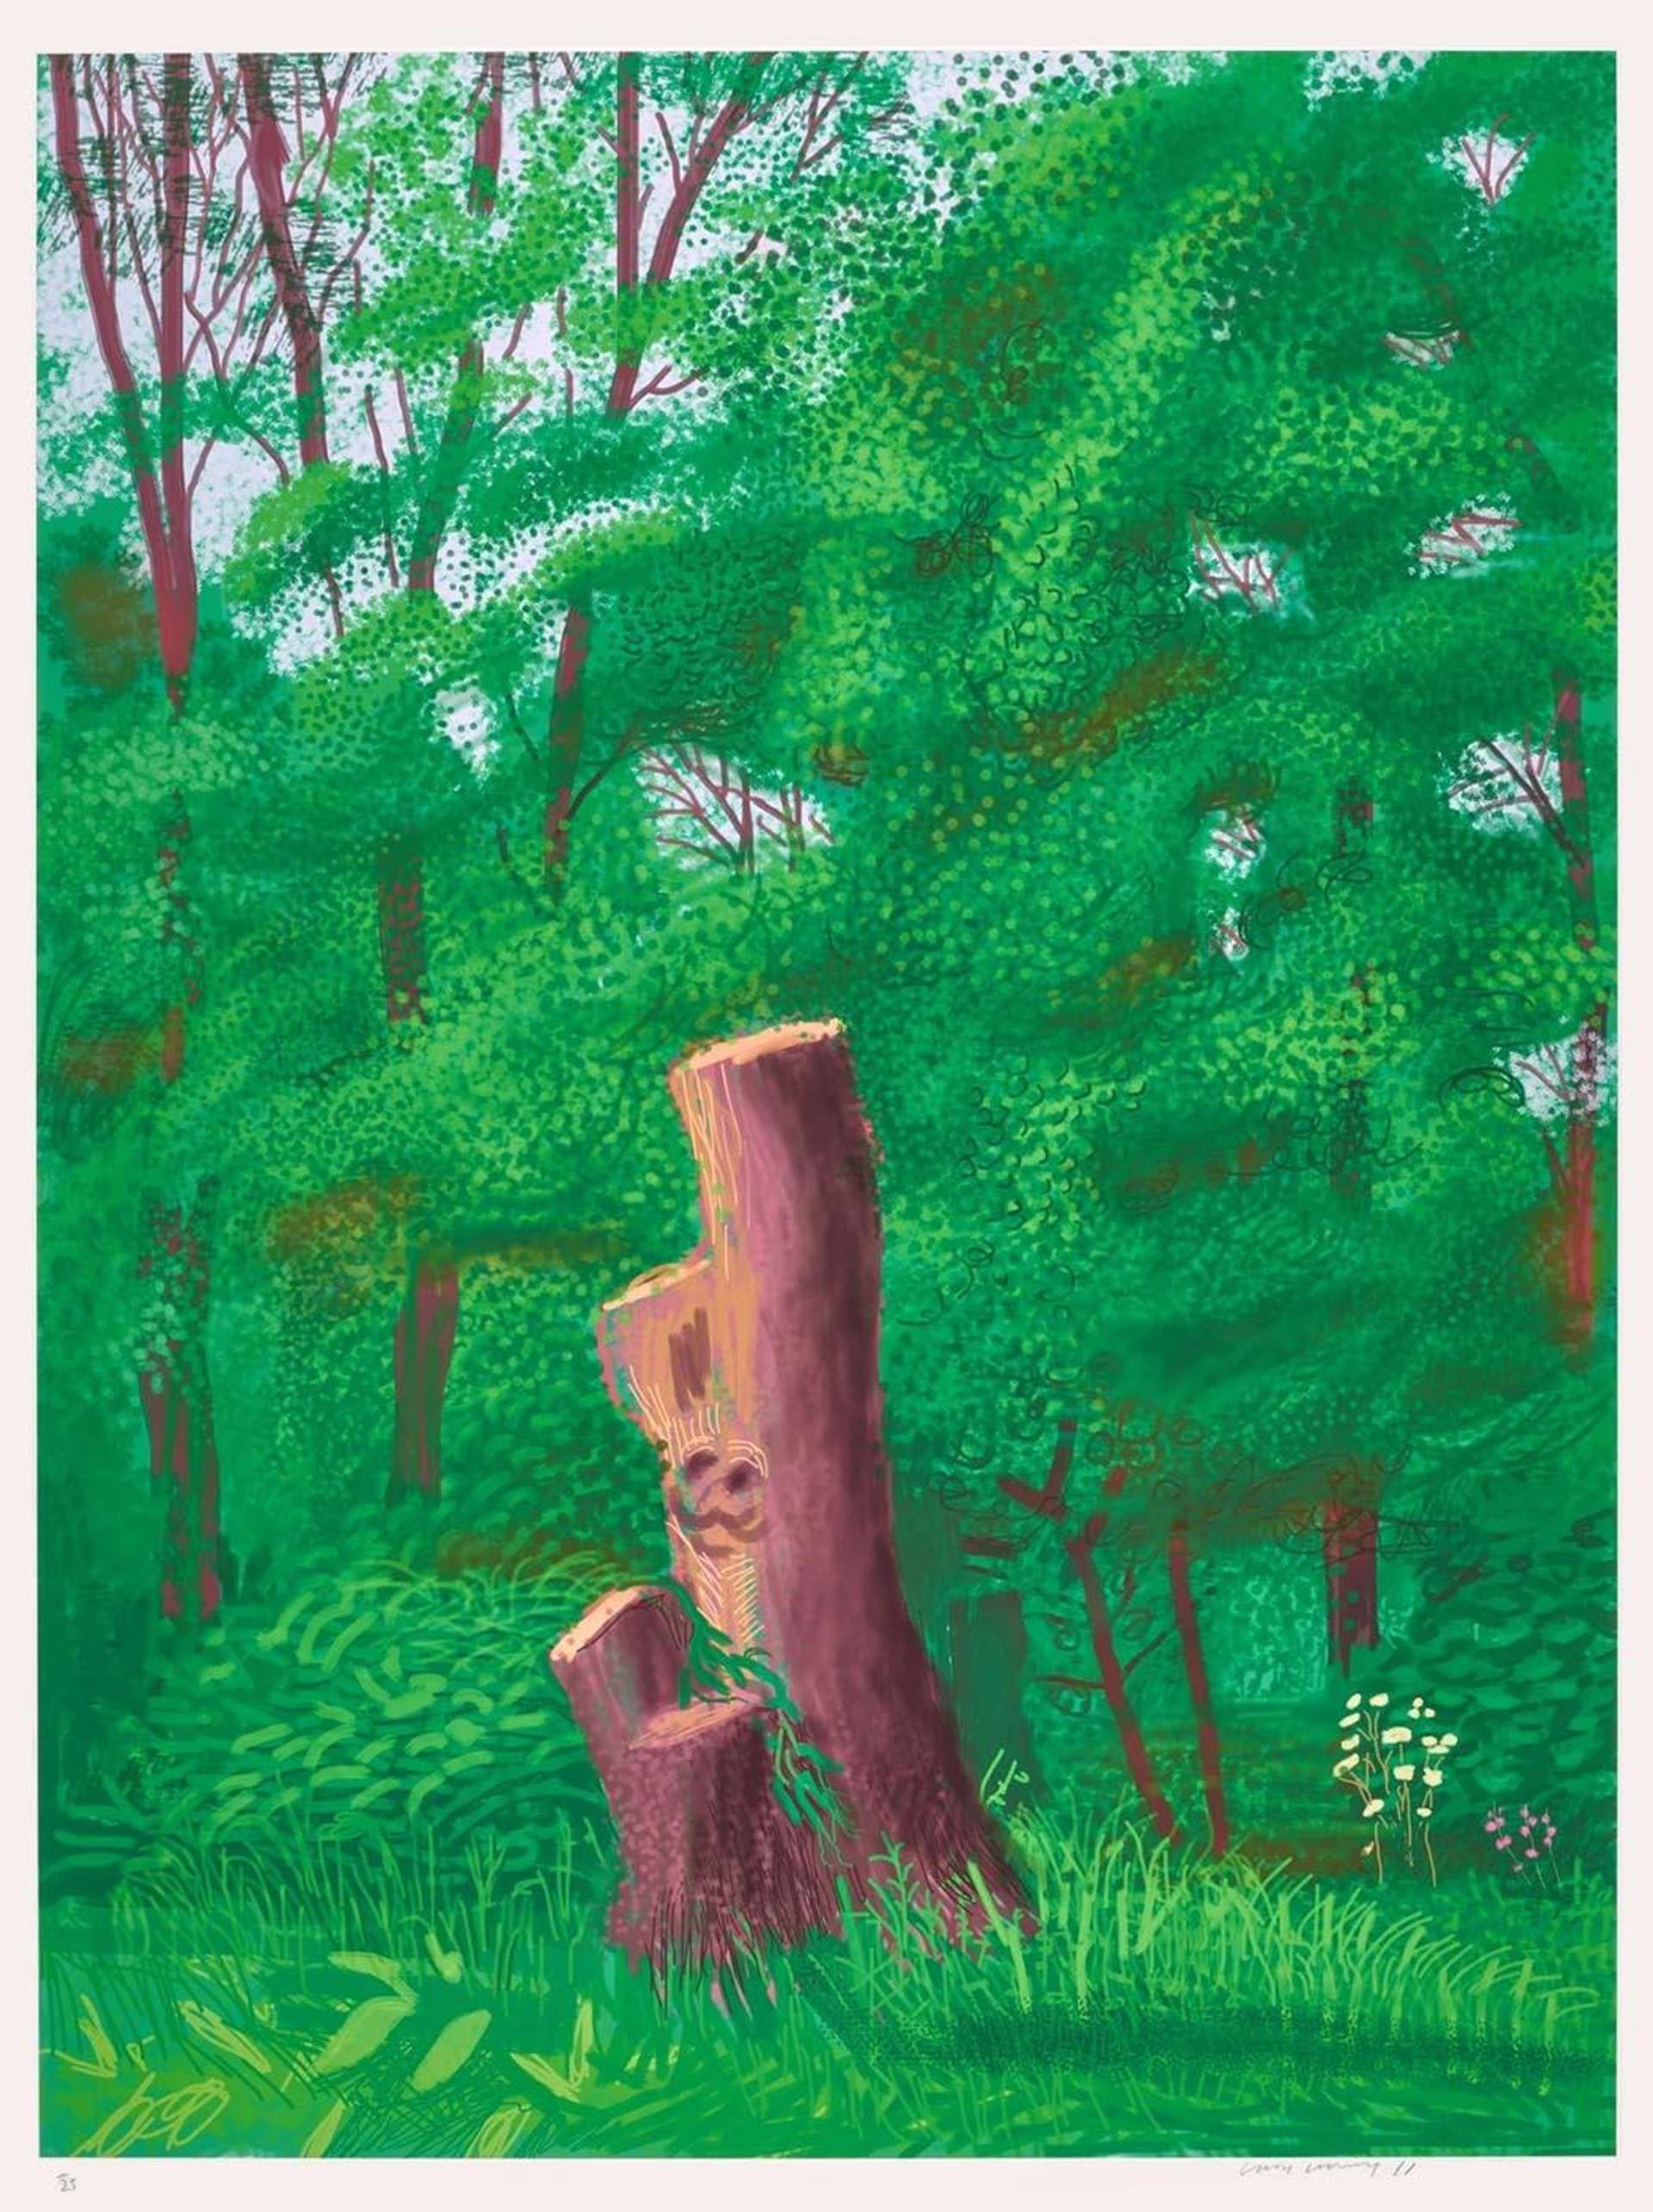 In this digital drawing by Hockney, a tree stump is in the foreground, amidst a green wooded scene.